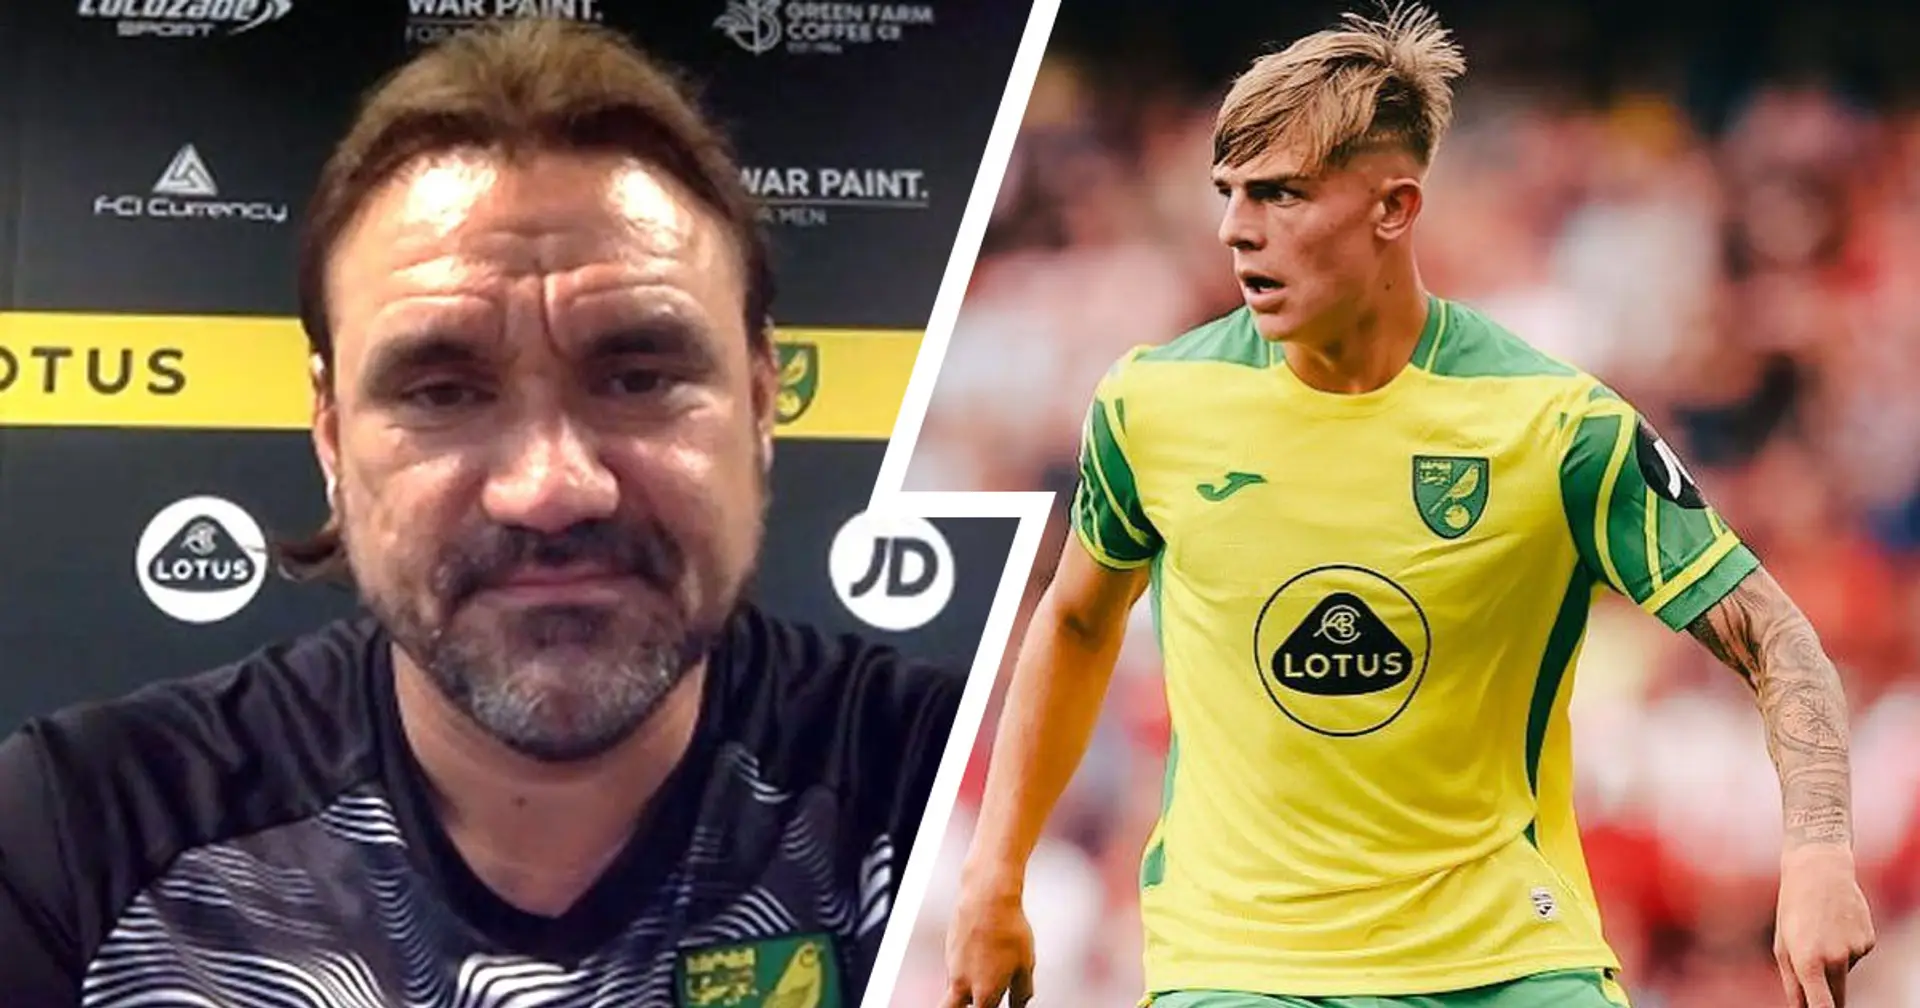 'It's not a gift that we play them': Norwich City manager Farke responds to claims of lack of game-time for Williams